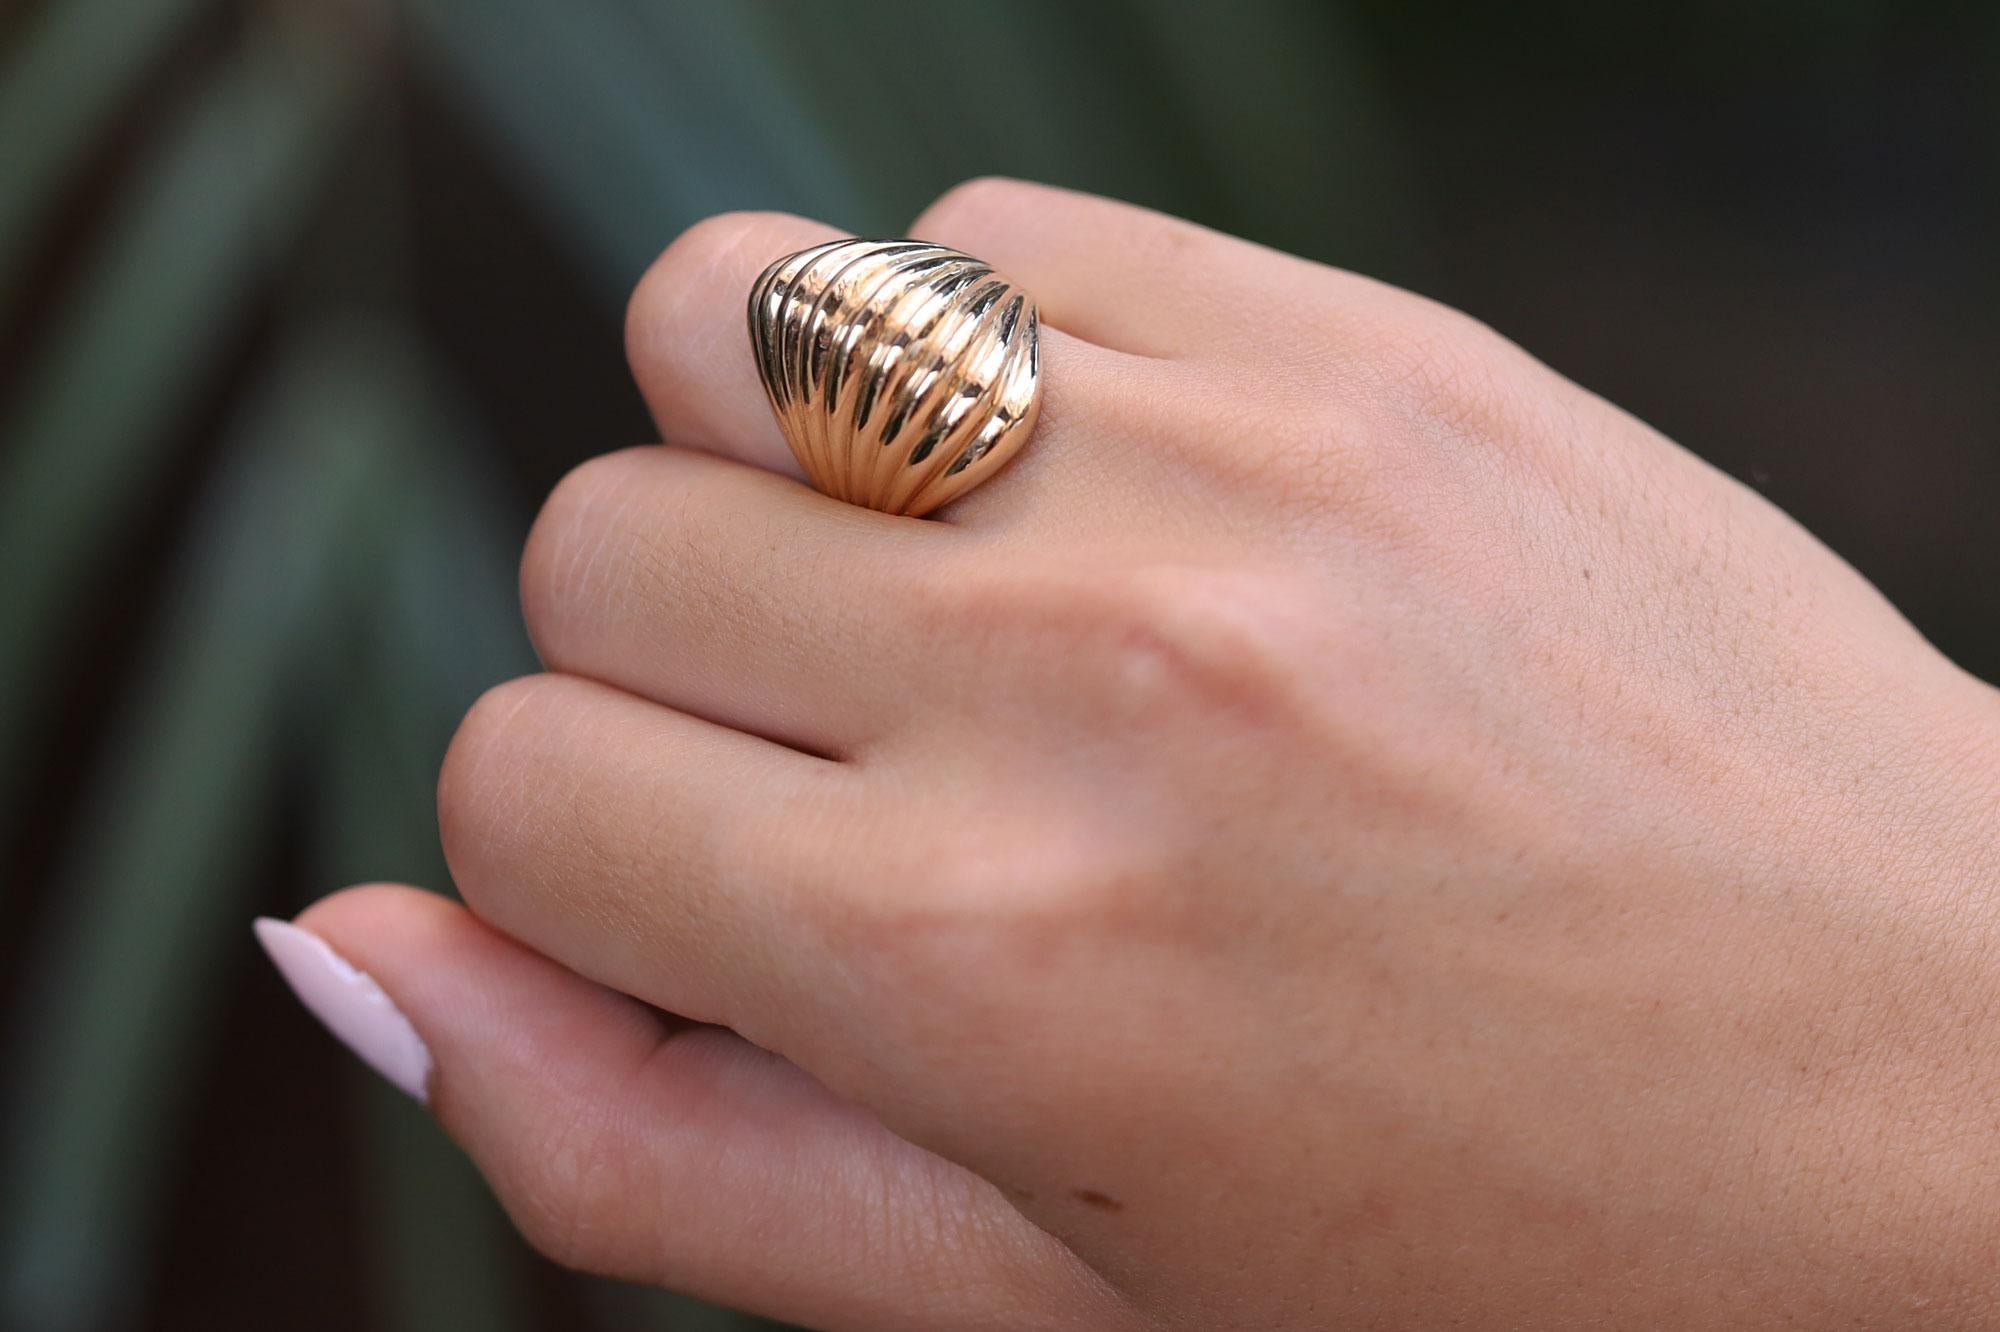 This exquisite mid-century statement piece is a sustainable estate jewel, expertly handcrafted with 14k yellow gold. Experience the impressive dome display and finger coverage of this weighty ring. Sure to garner many compliments, don't hesitate to